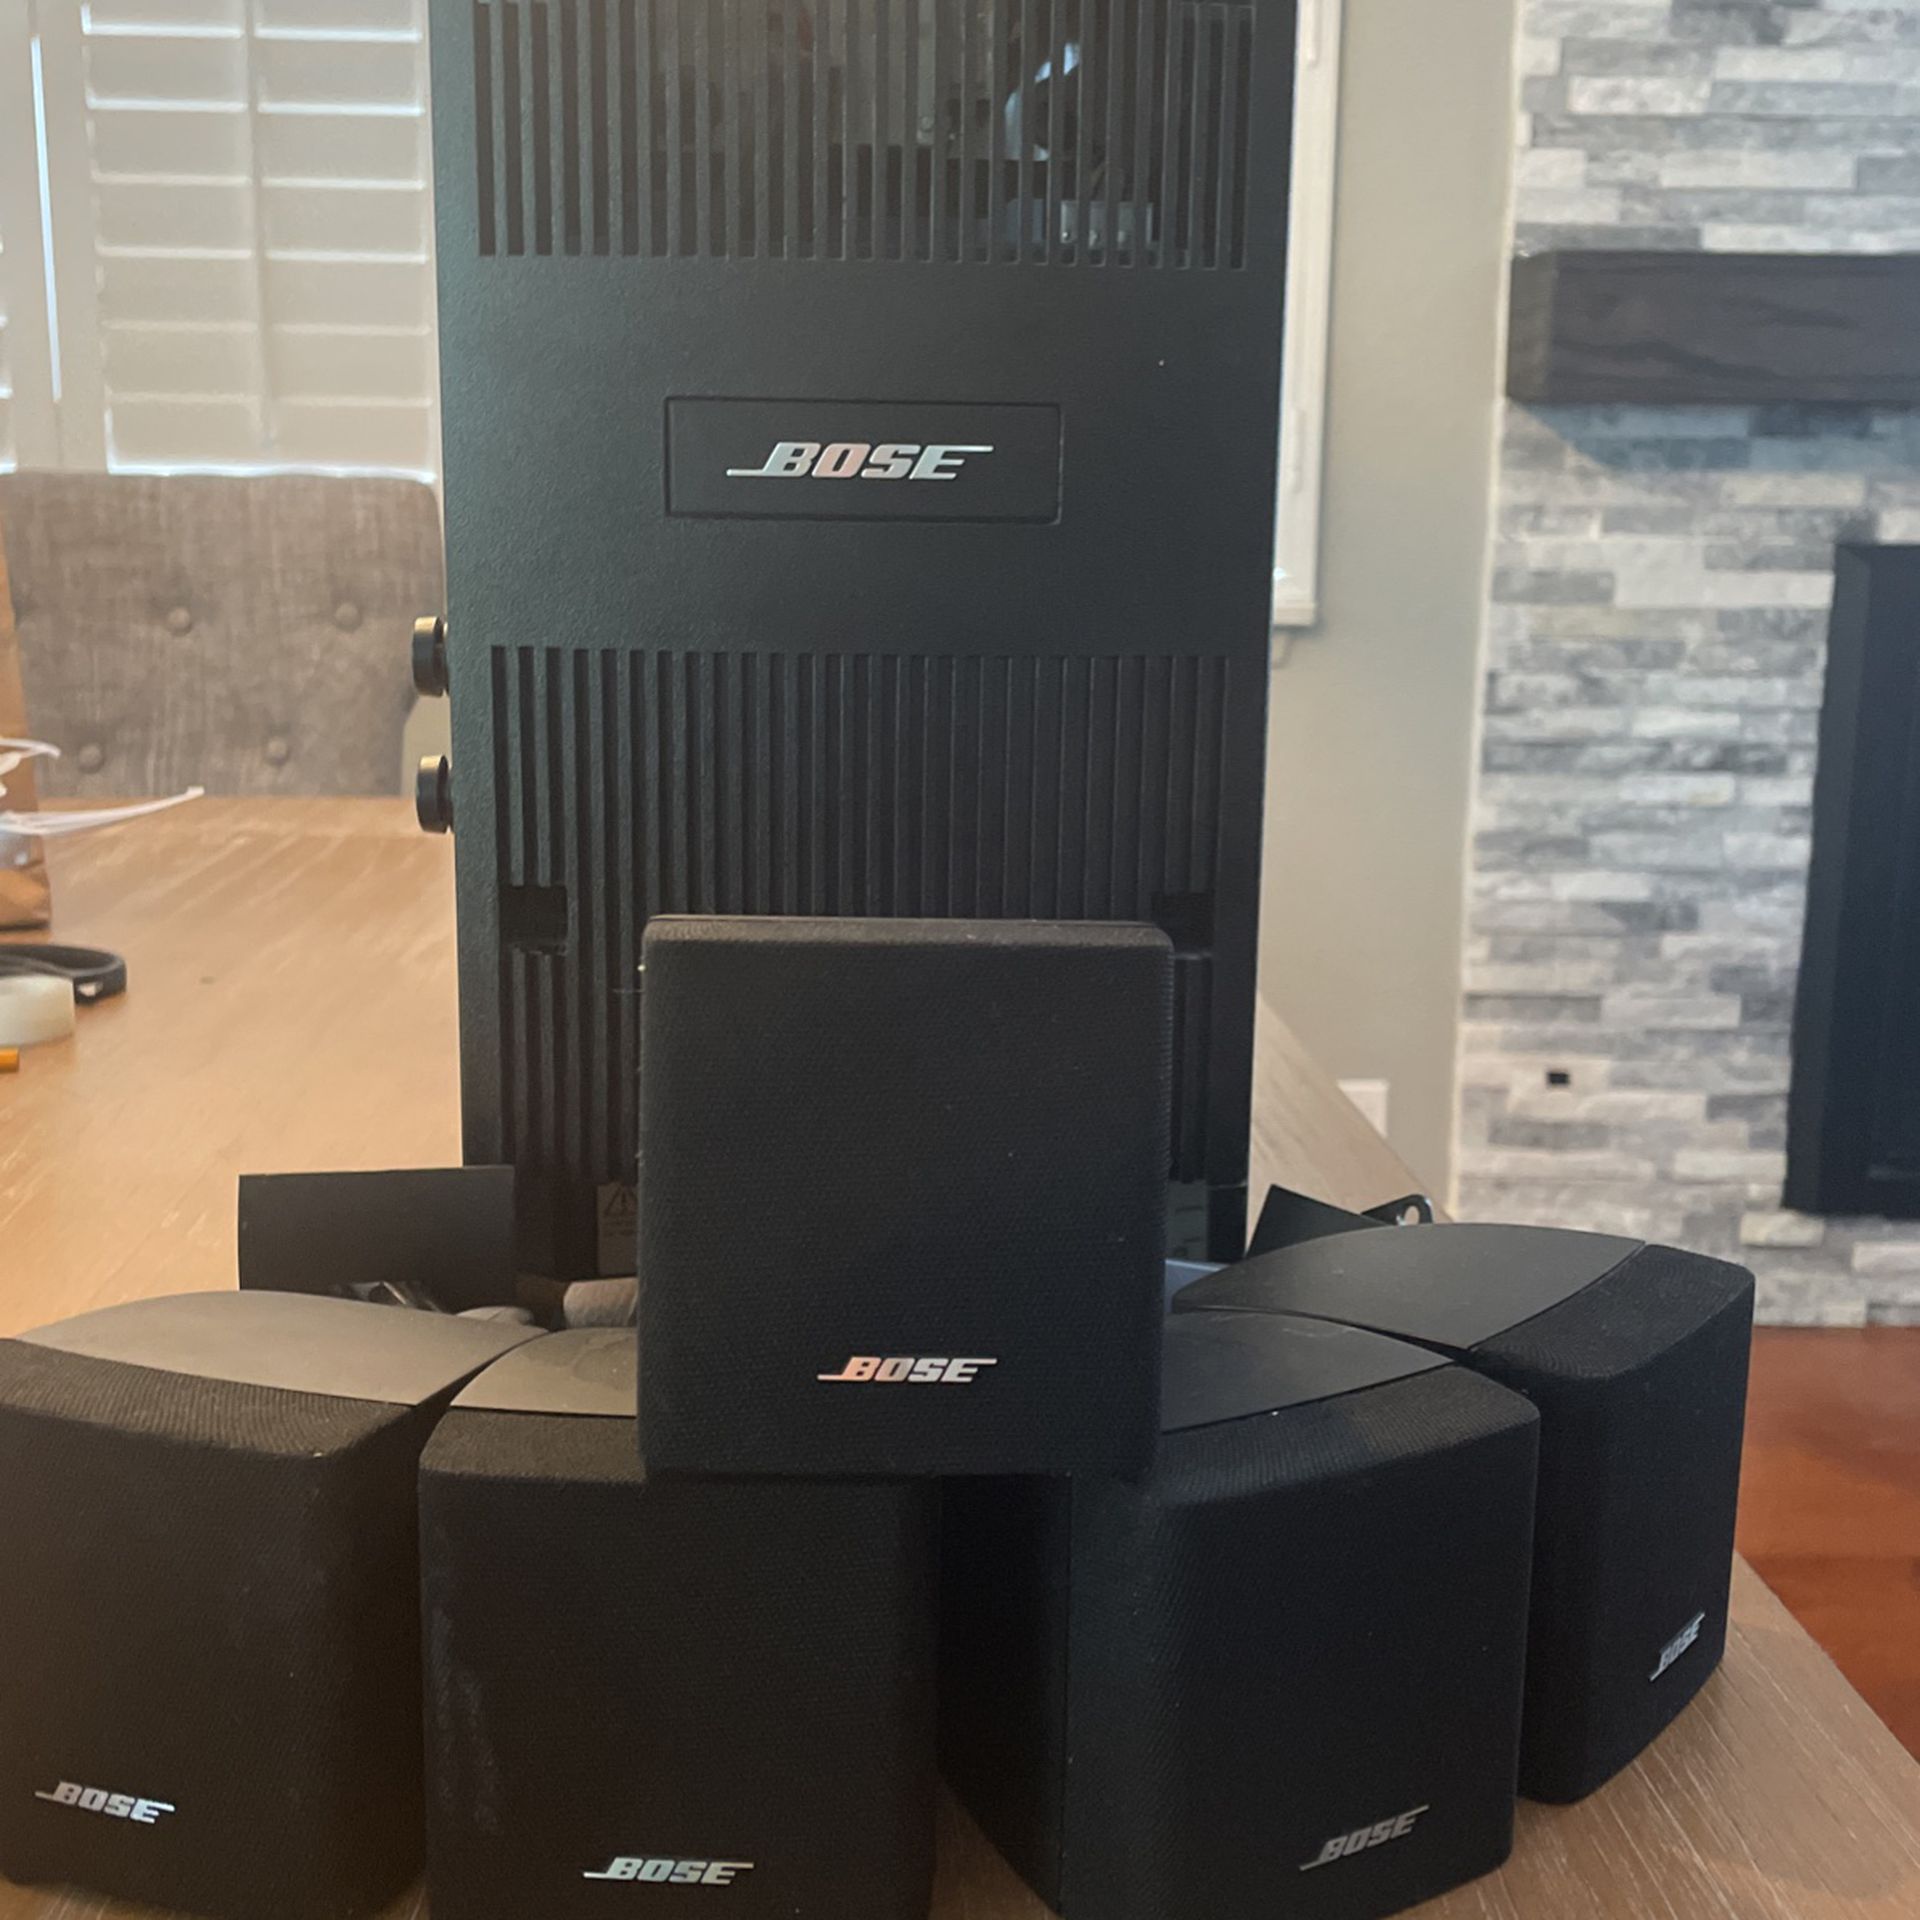 Bose Acoustimass 6 Surround Sound 5.1 Home Theatre Sale in City Of Industry, CA - OfferUp